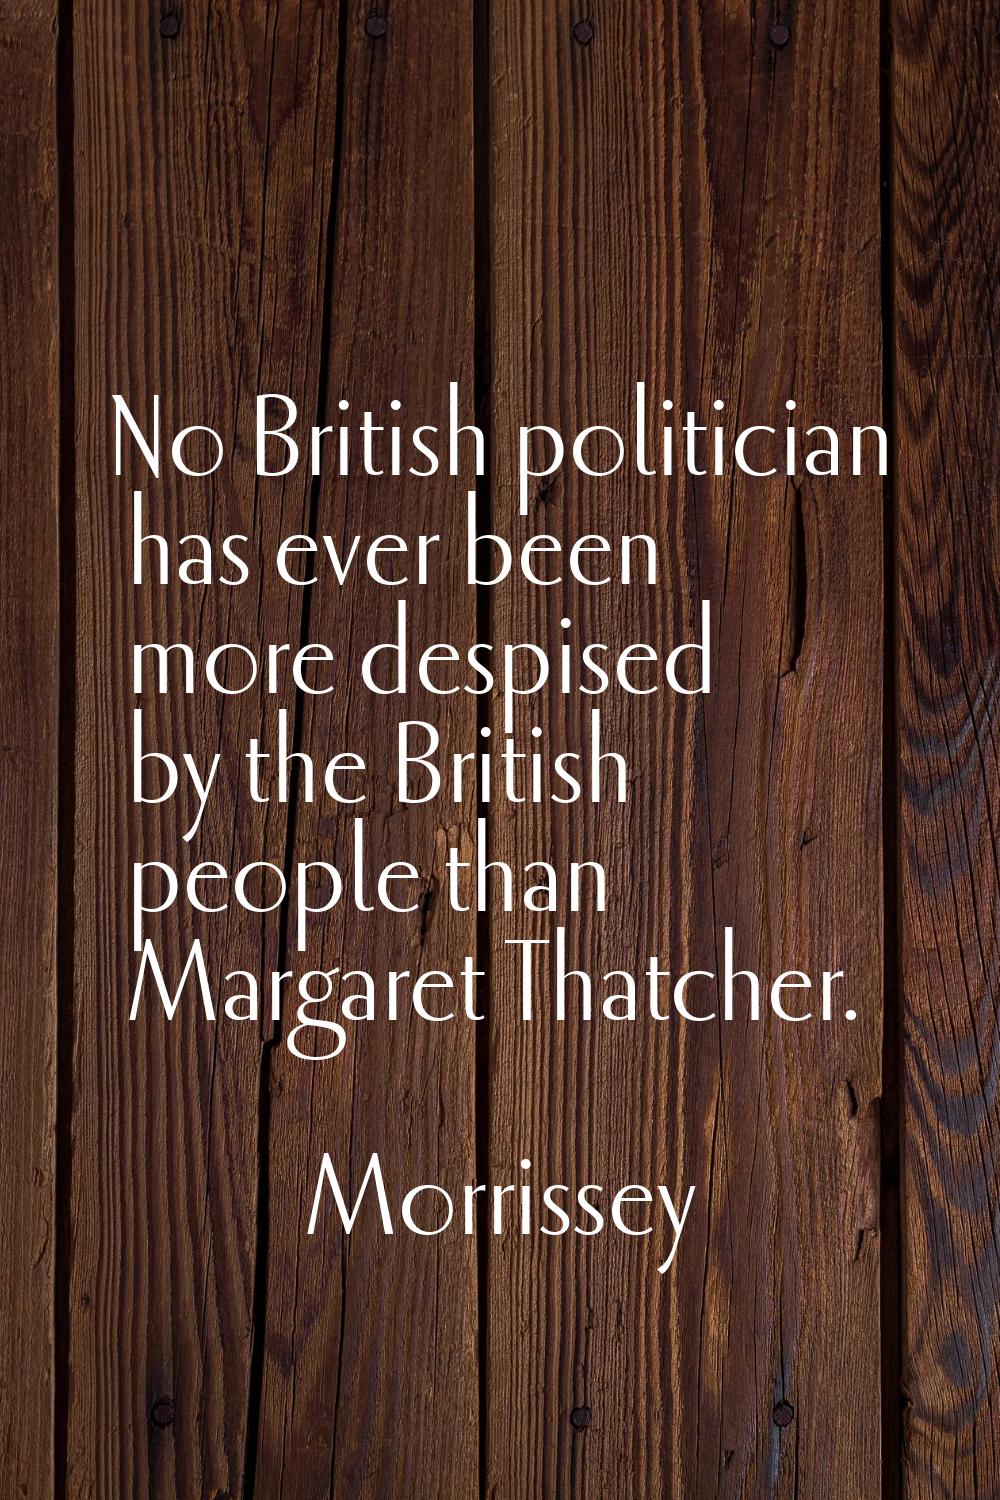 No British politician has ever been more despised by the British people than Margaret Thatcher.